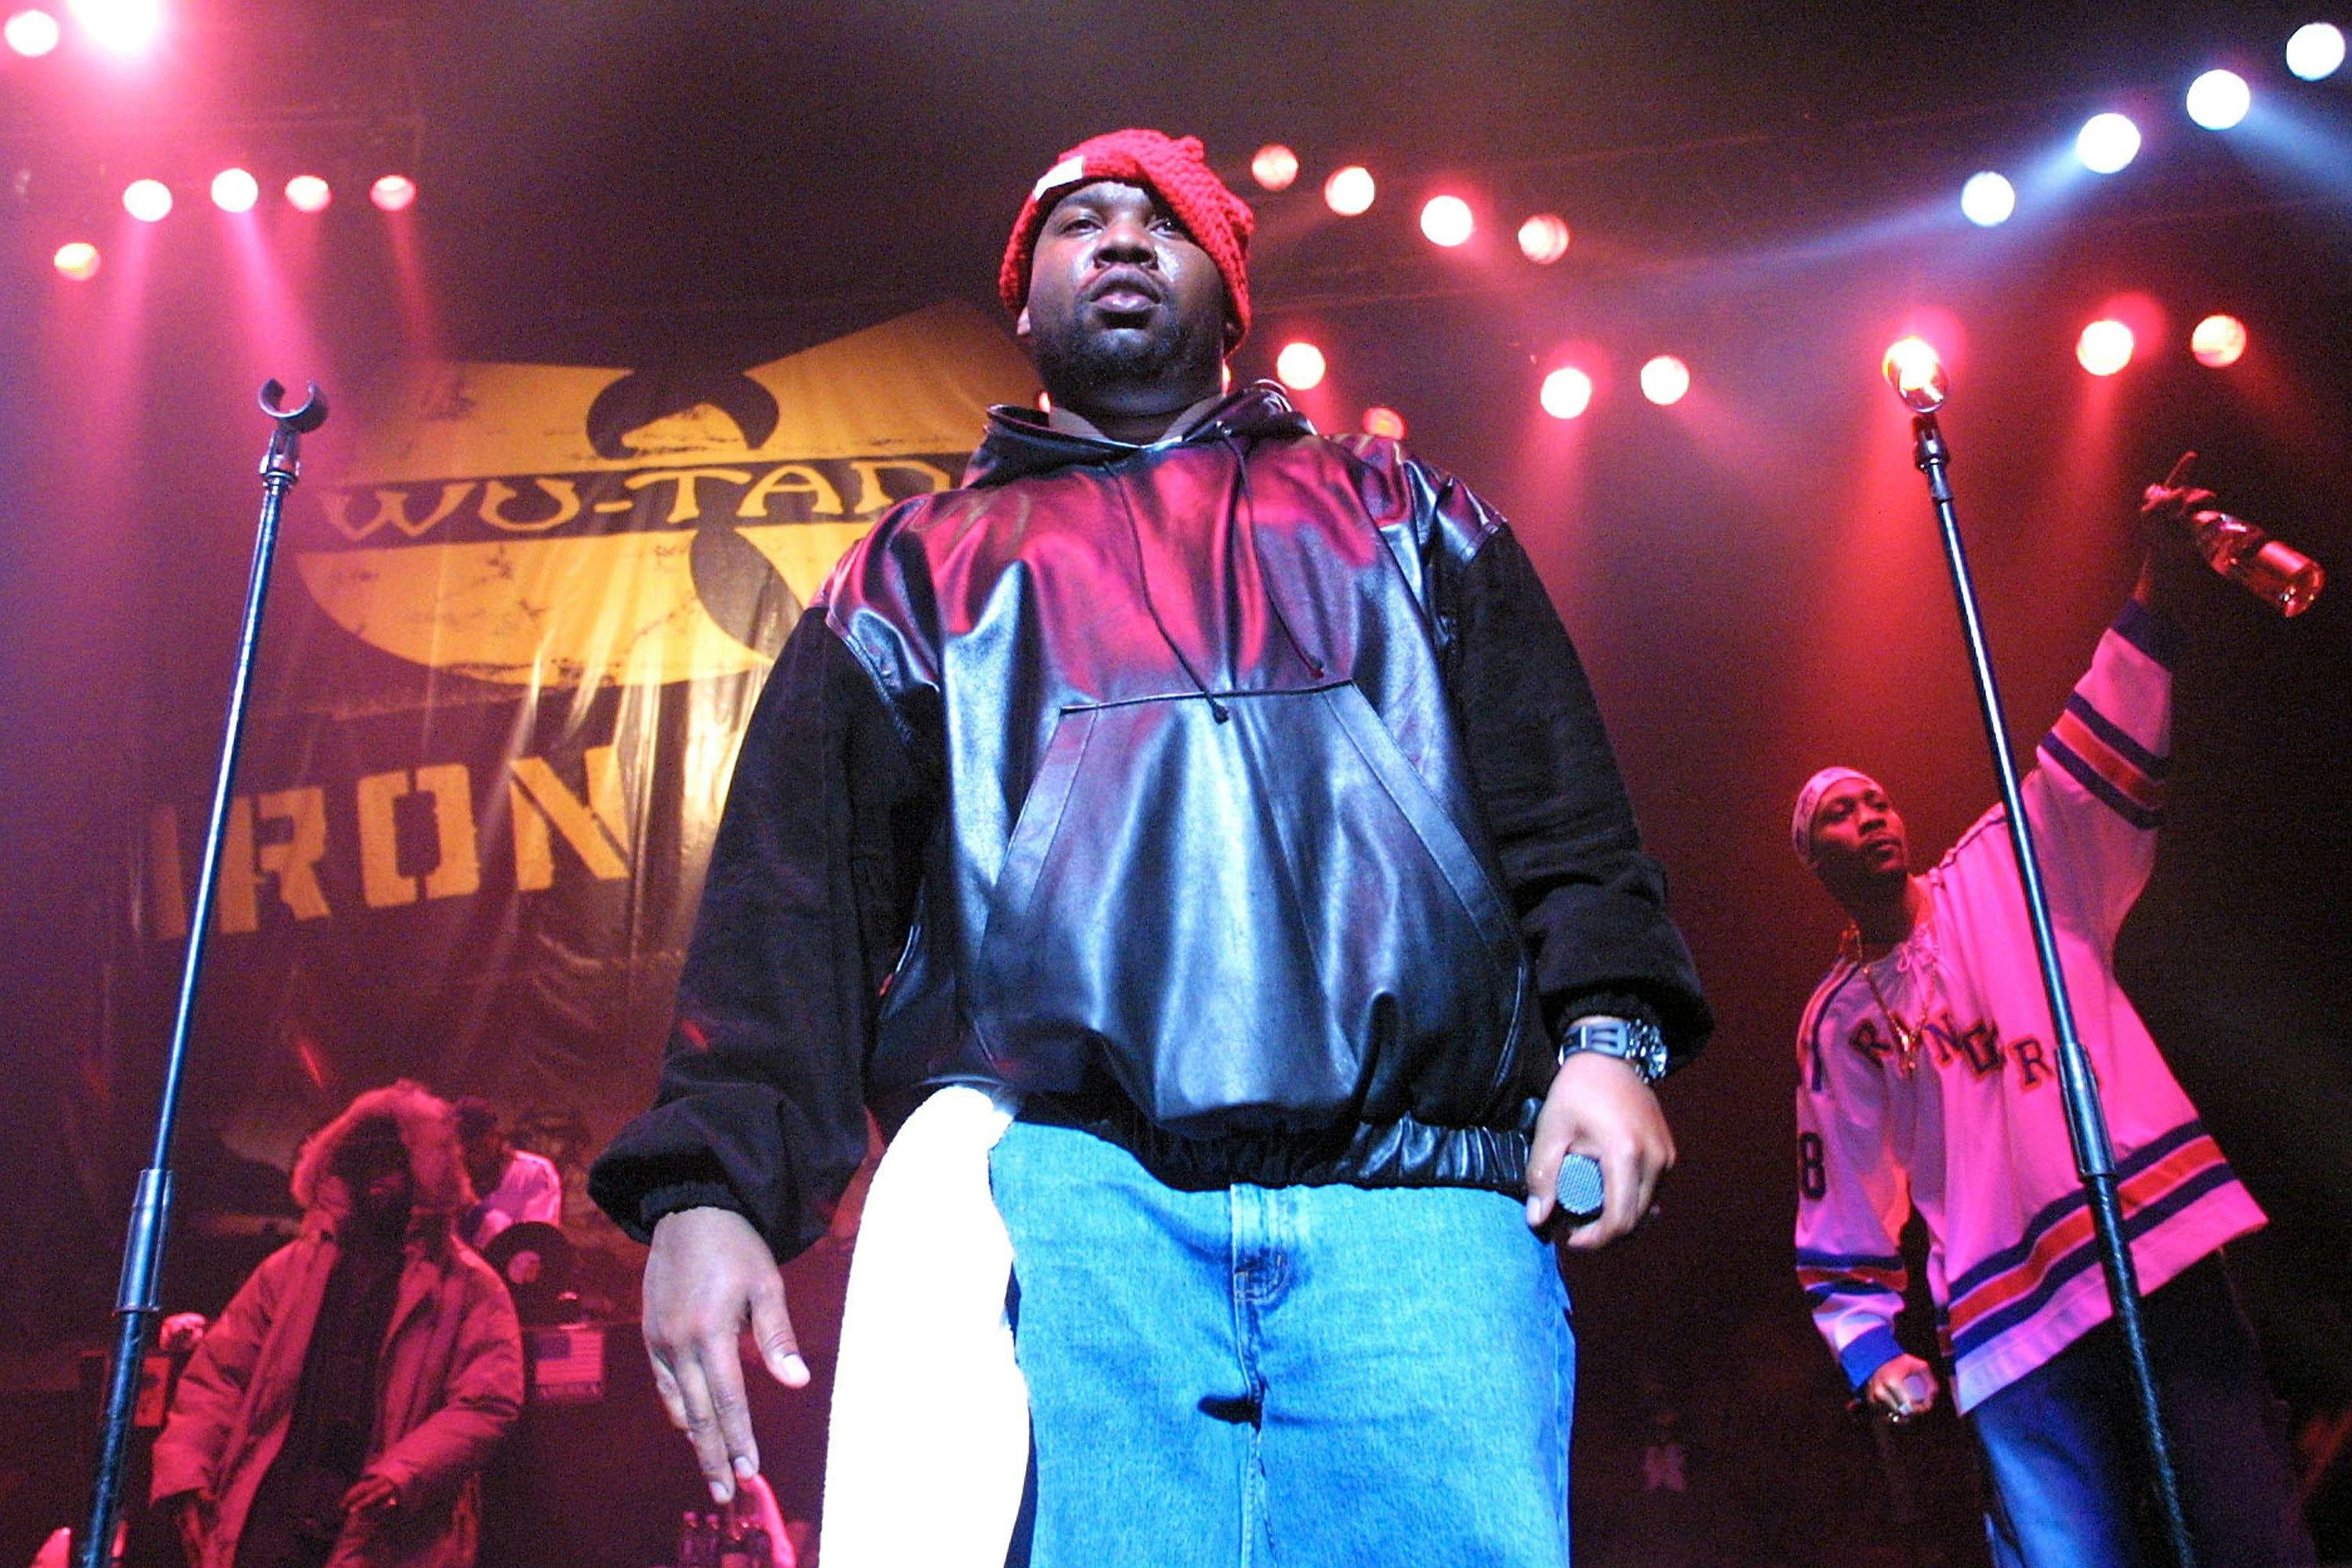 Raekwon, with RZA on back right, of the Wu-Tang Clan performs during a party to celebrate the release of their new album 